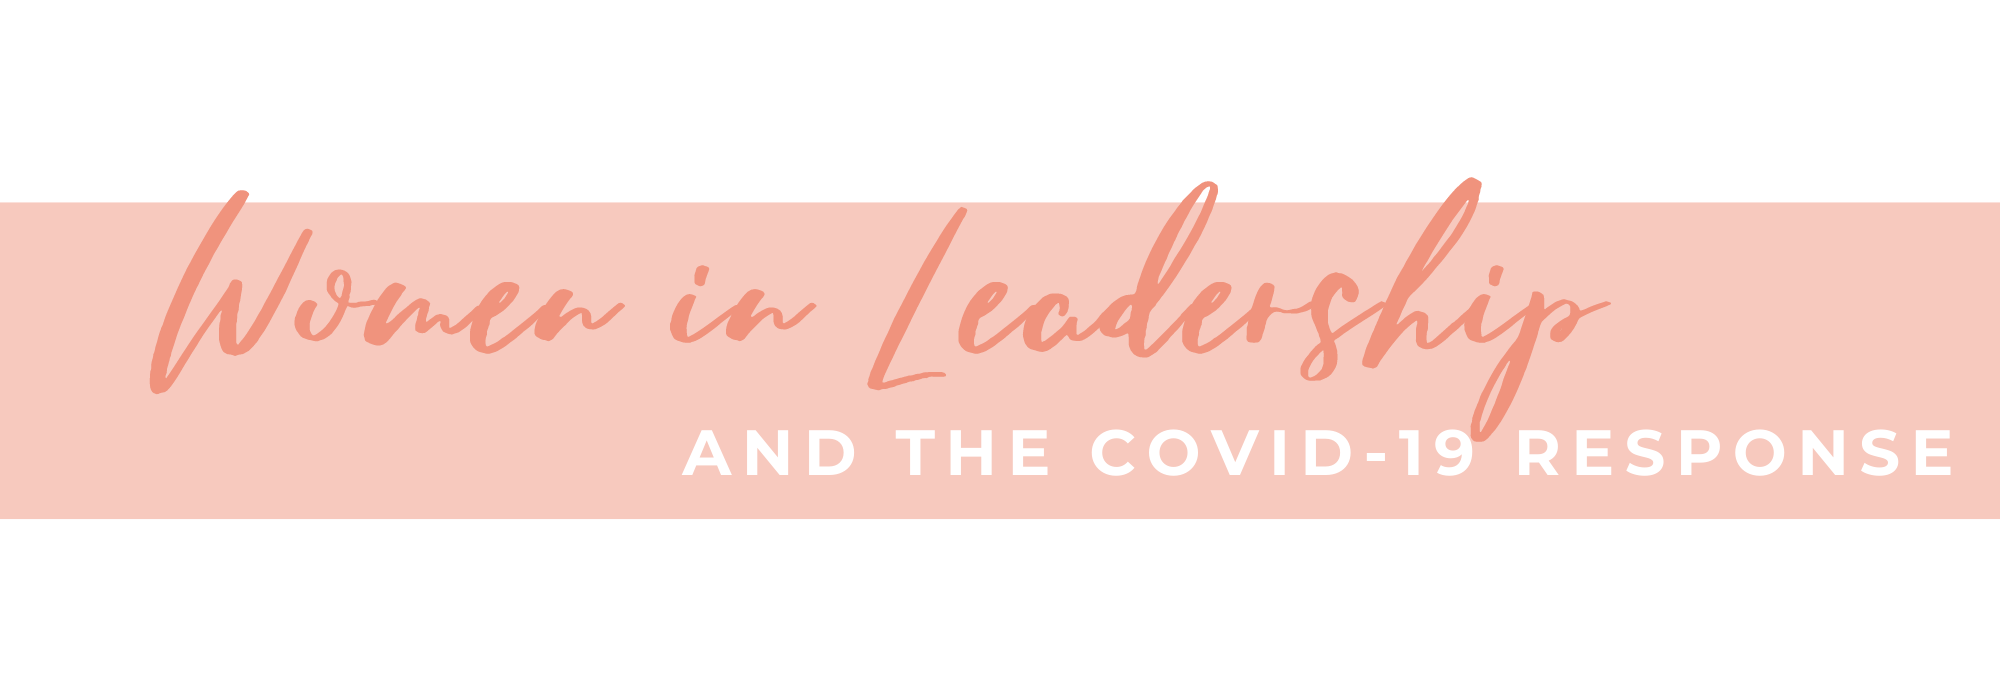 Women in leadership and the COVID-19 response